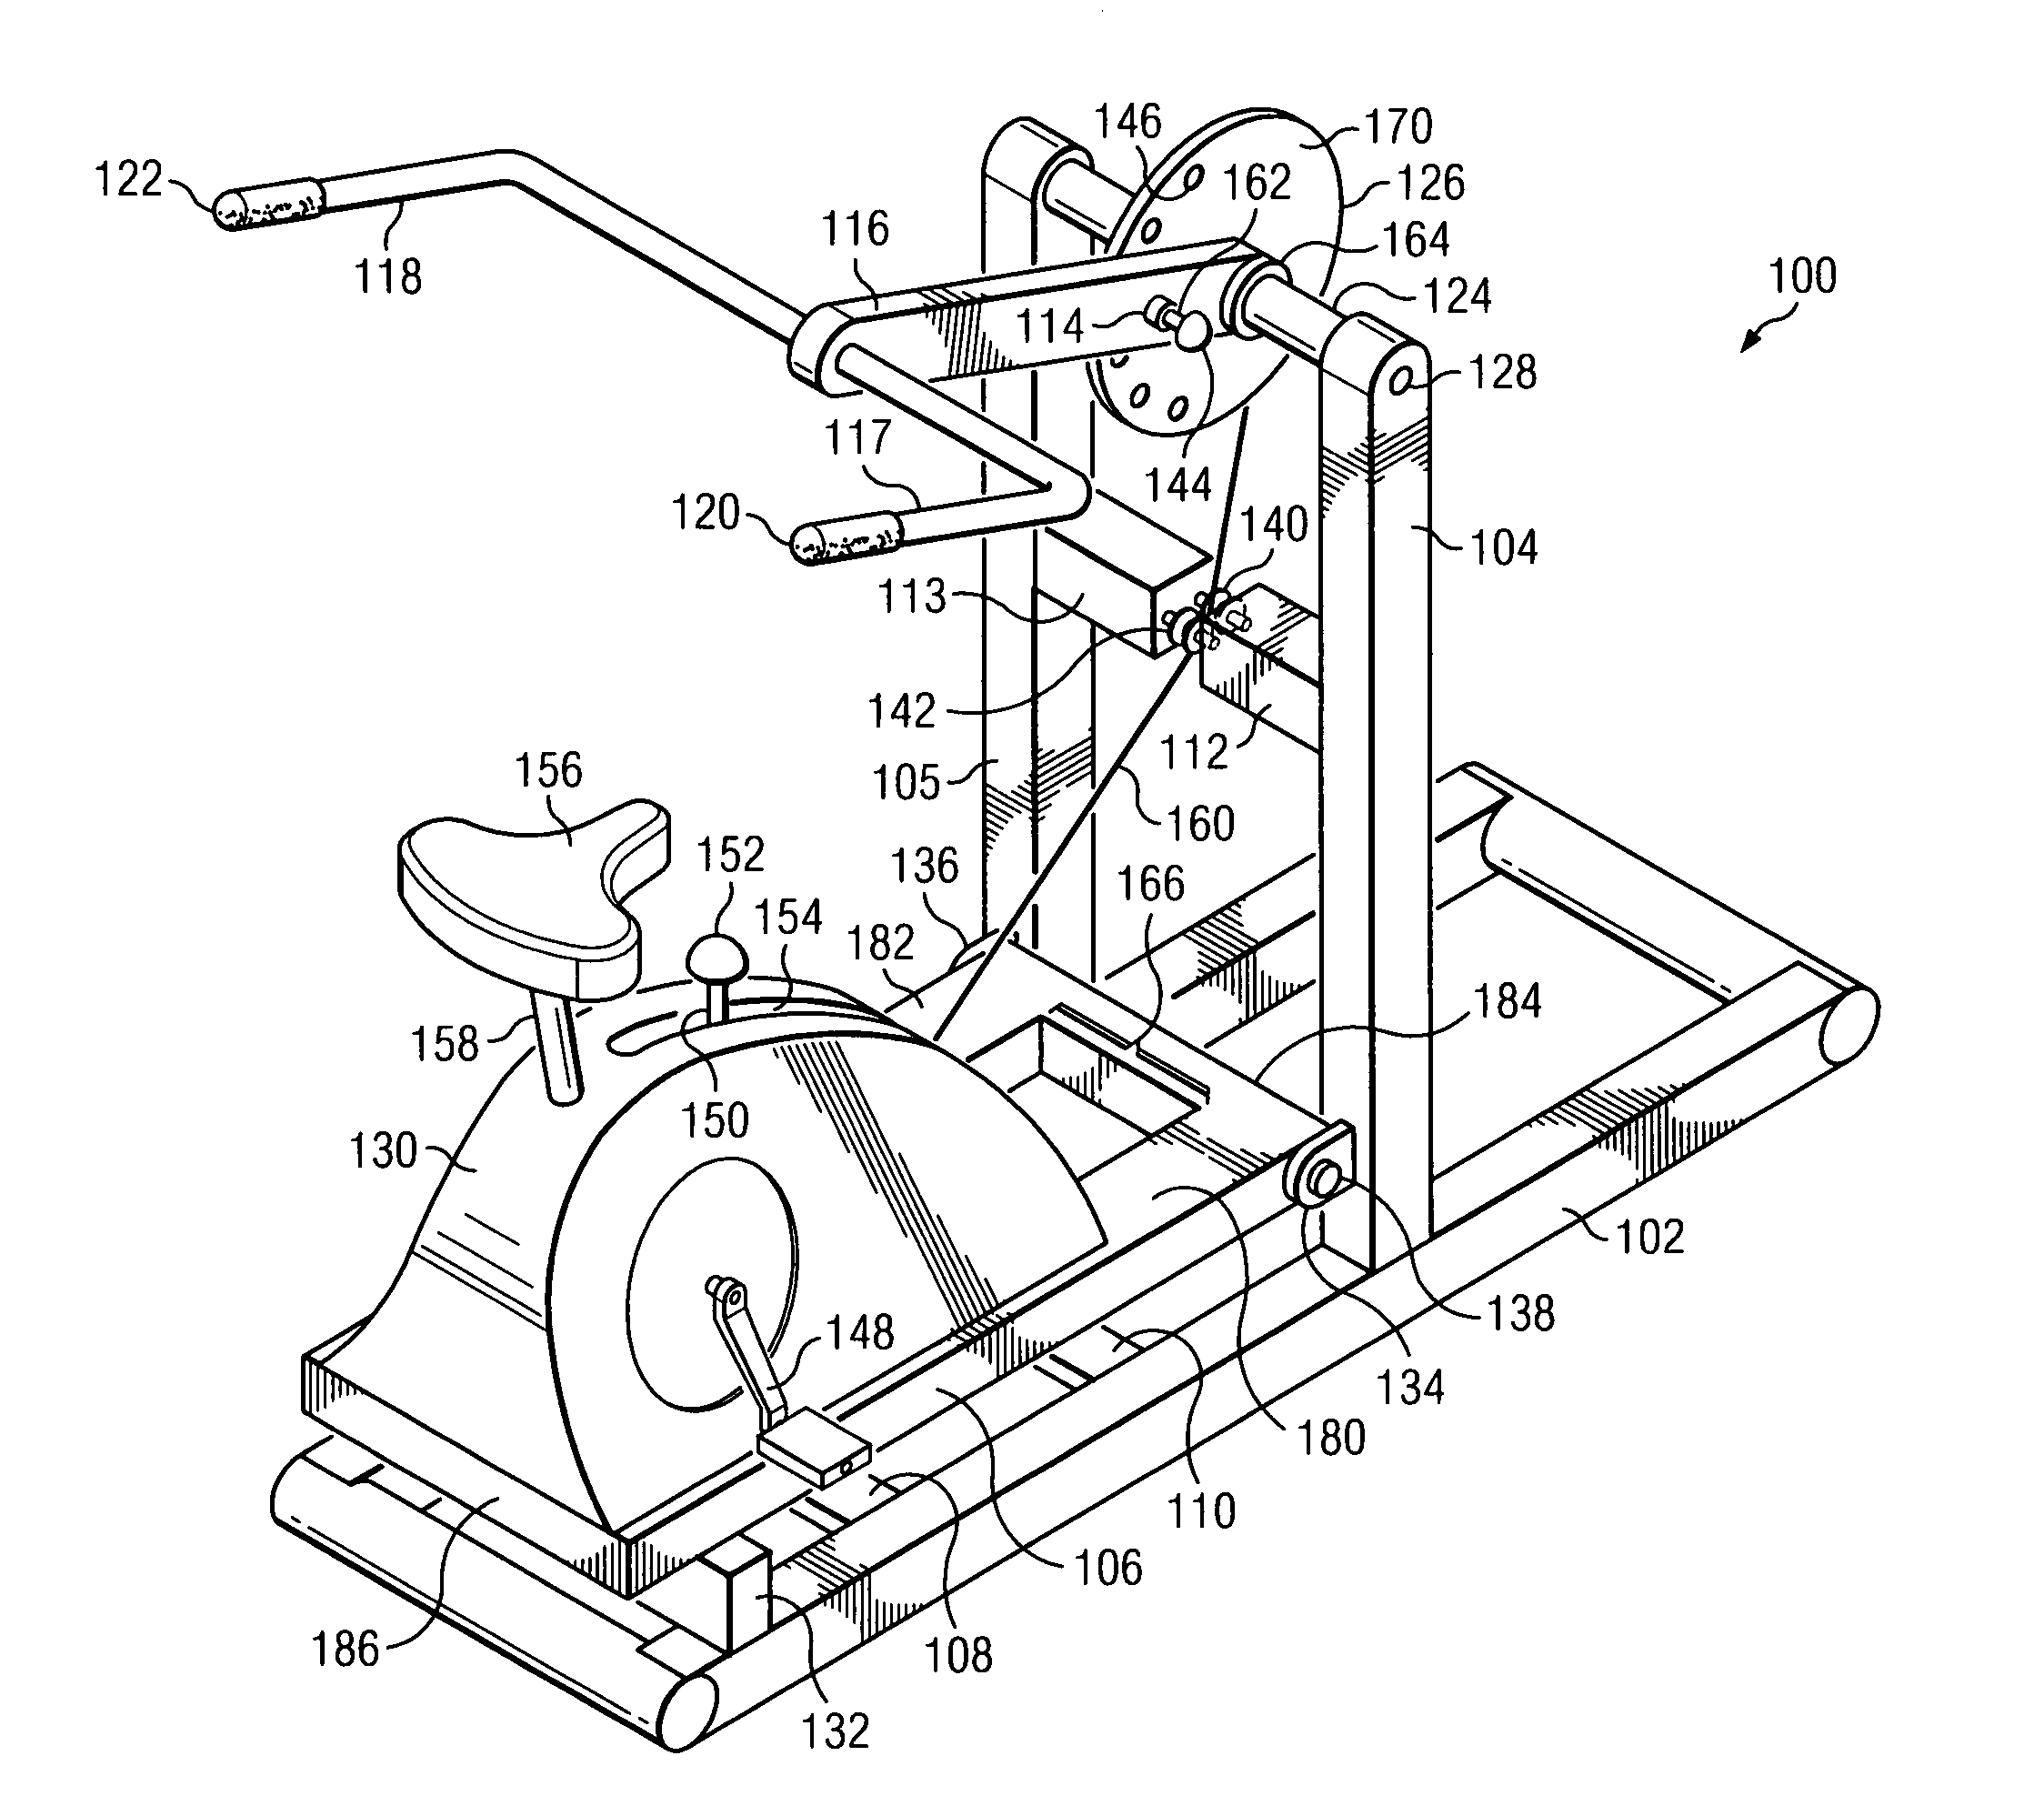 Multimotion exercise apparatus and method